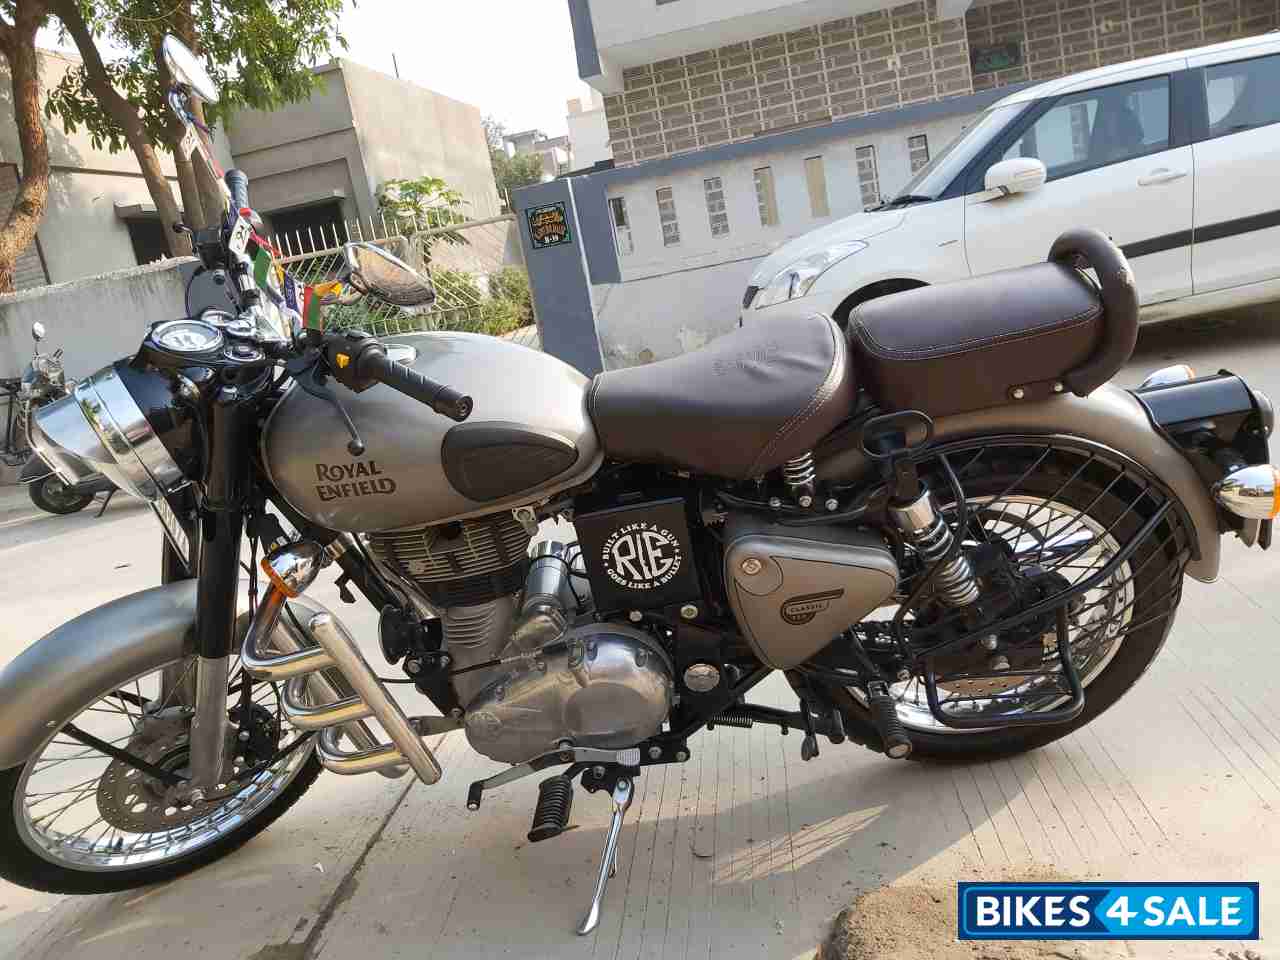 Used 2019 model Royal Enfield Classic Gunmetal Grey for sale in ...